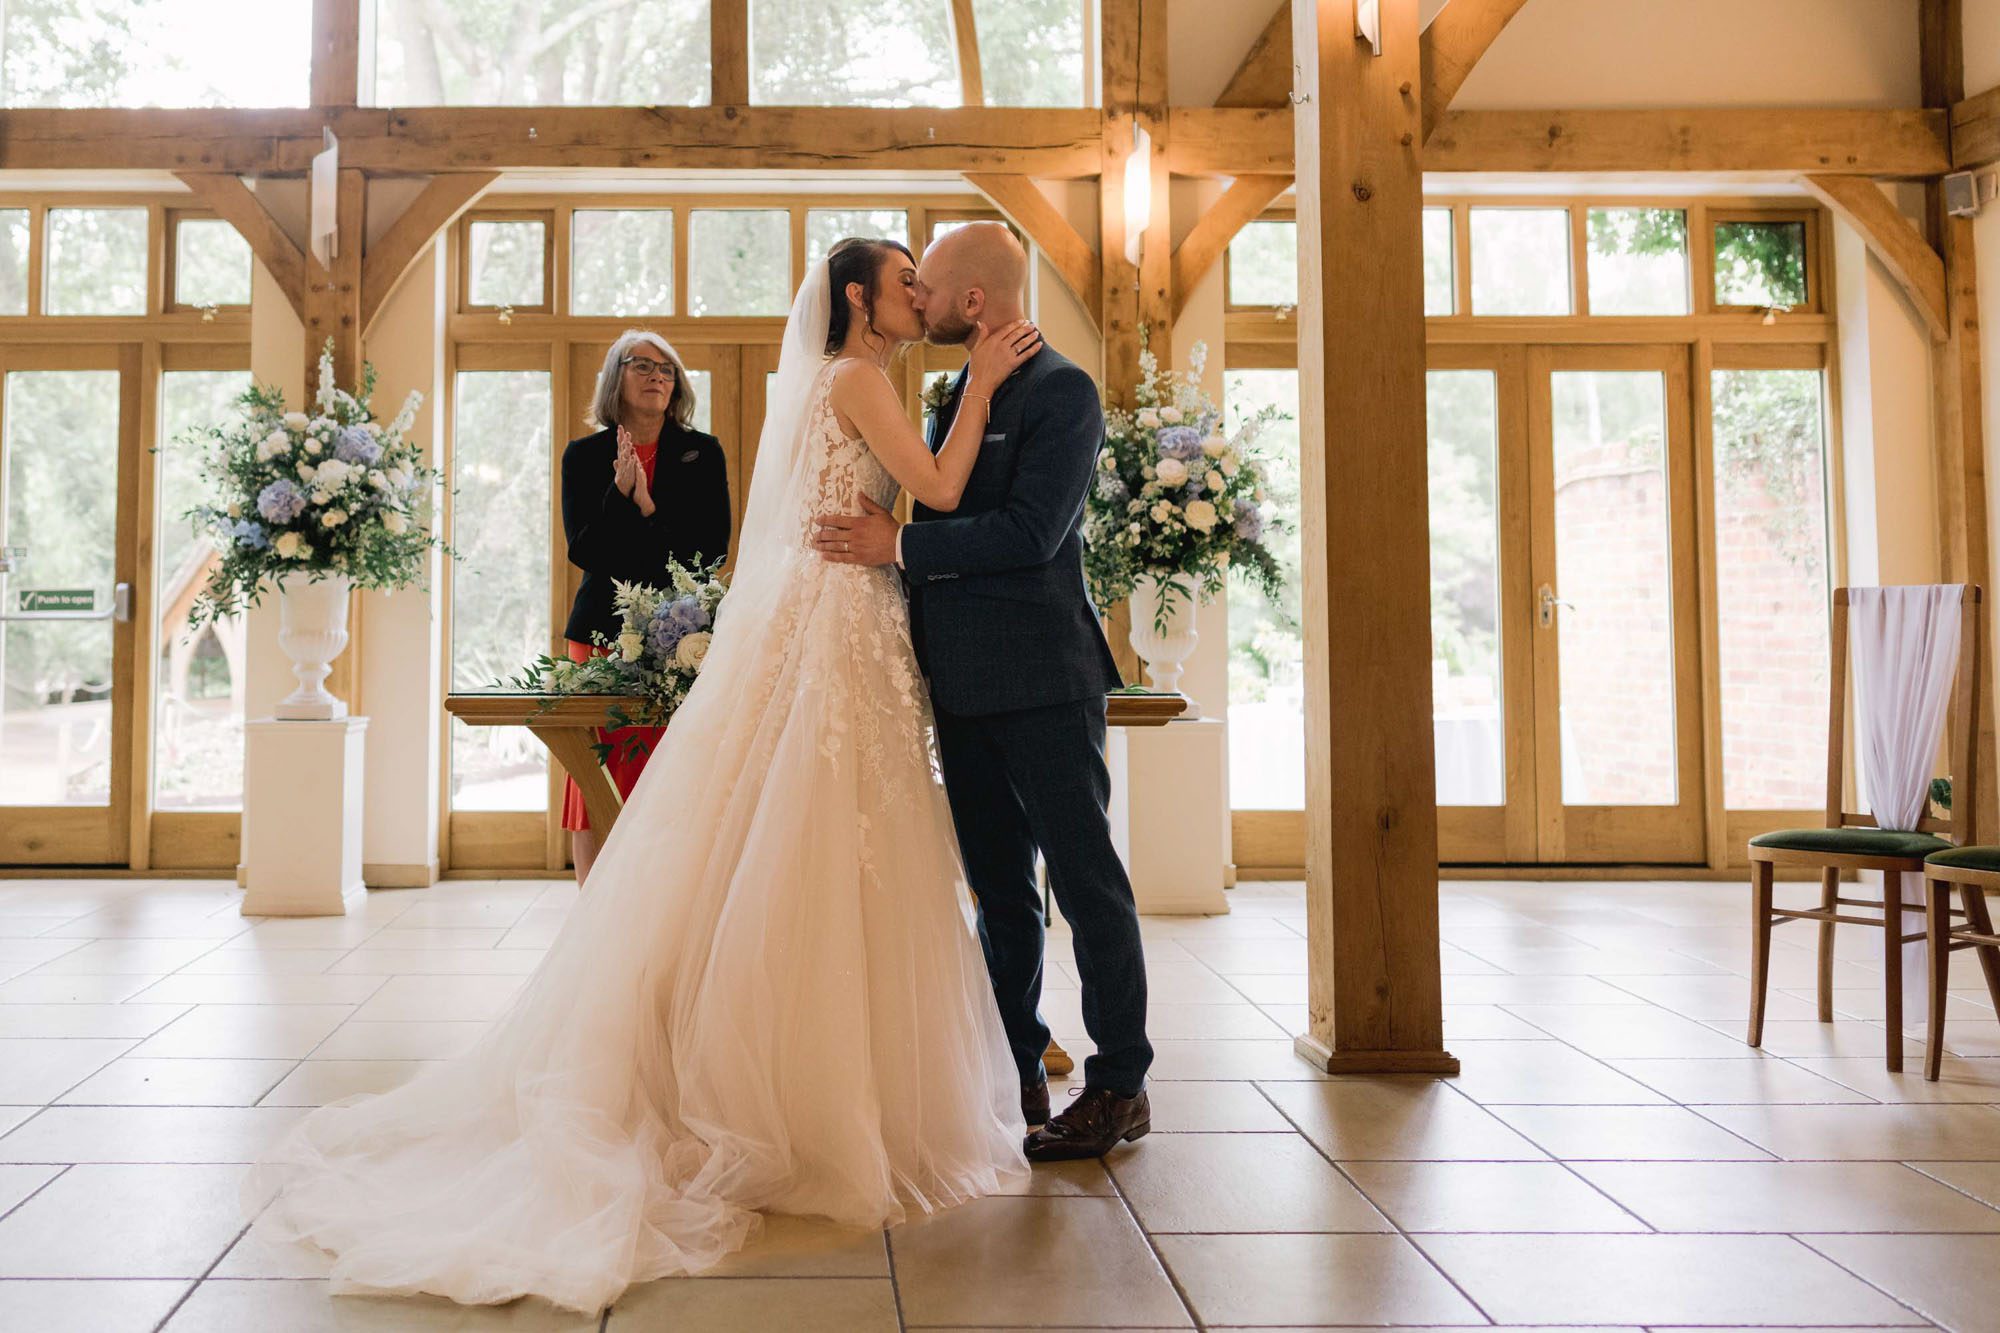 Bride and groom kiss on their wedding day during the ceremony at Rivervale Barn in Hampshire.